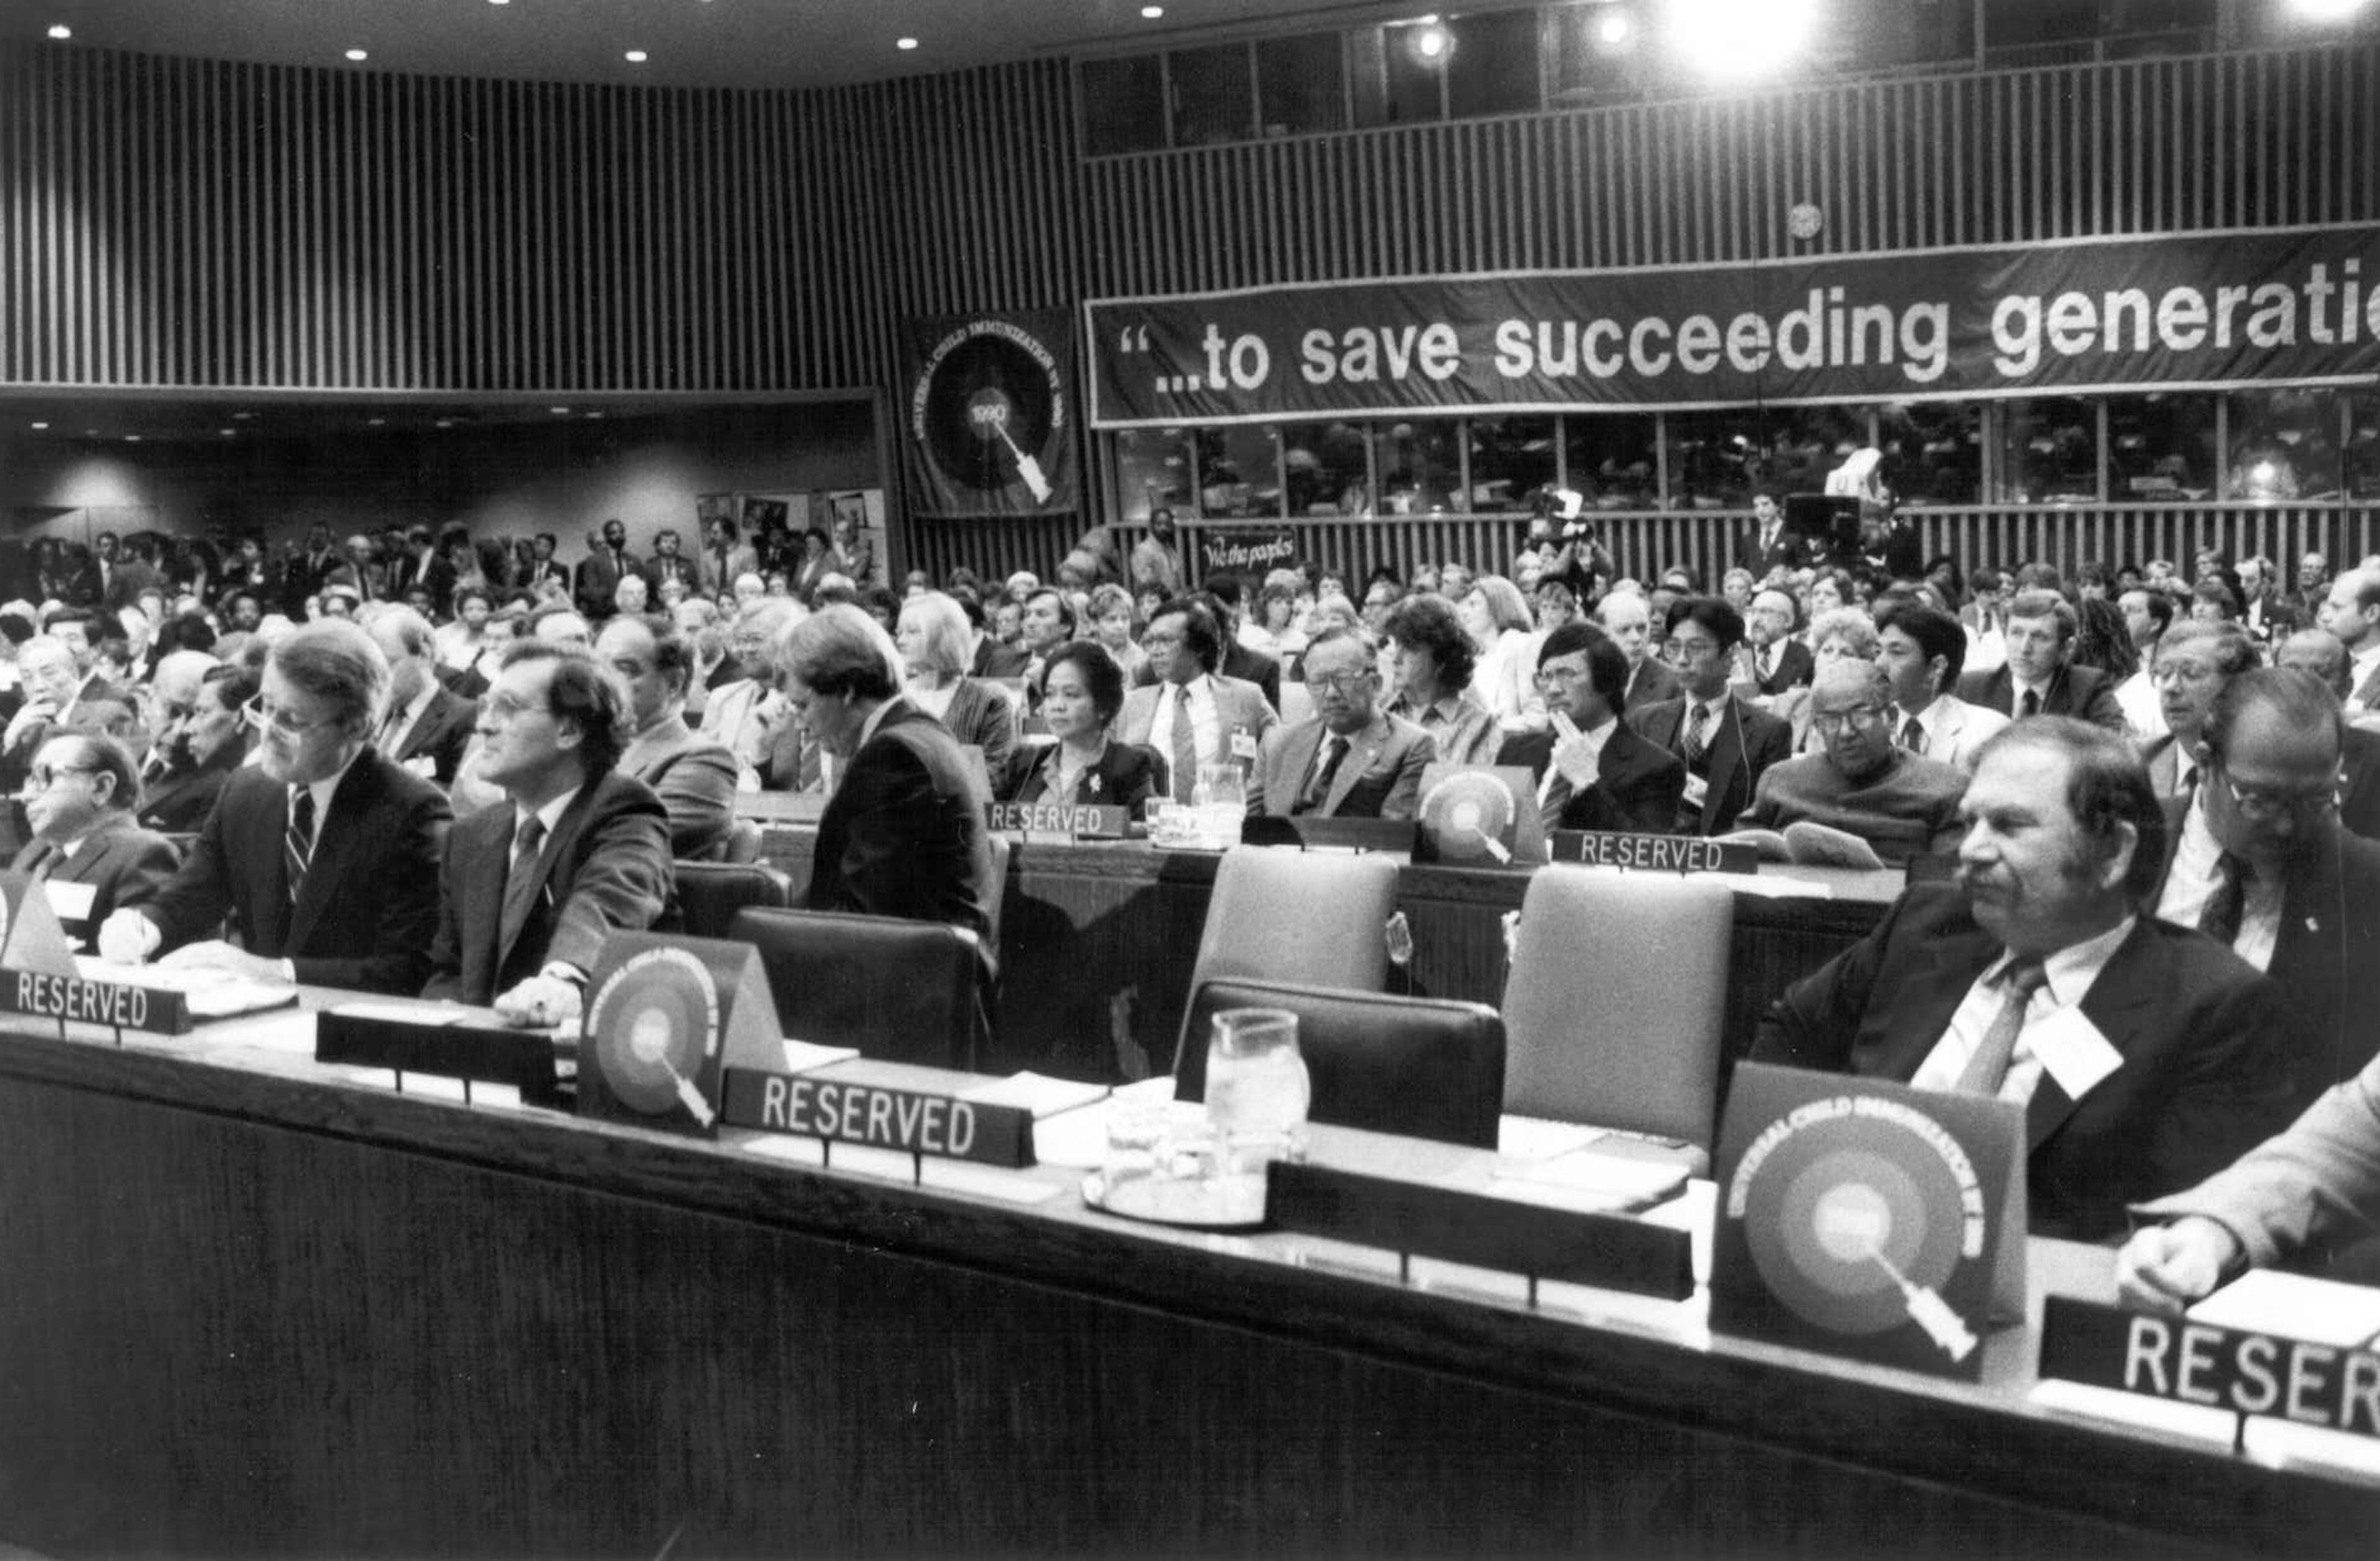 Conference at the Universal Child Immunization (UCI) held in 1990